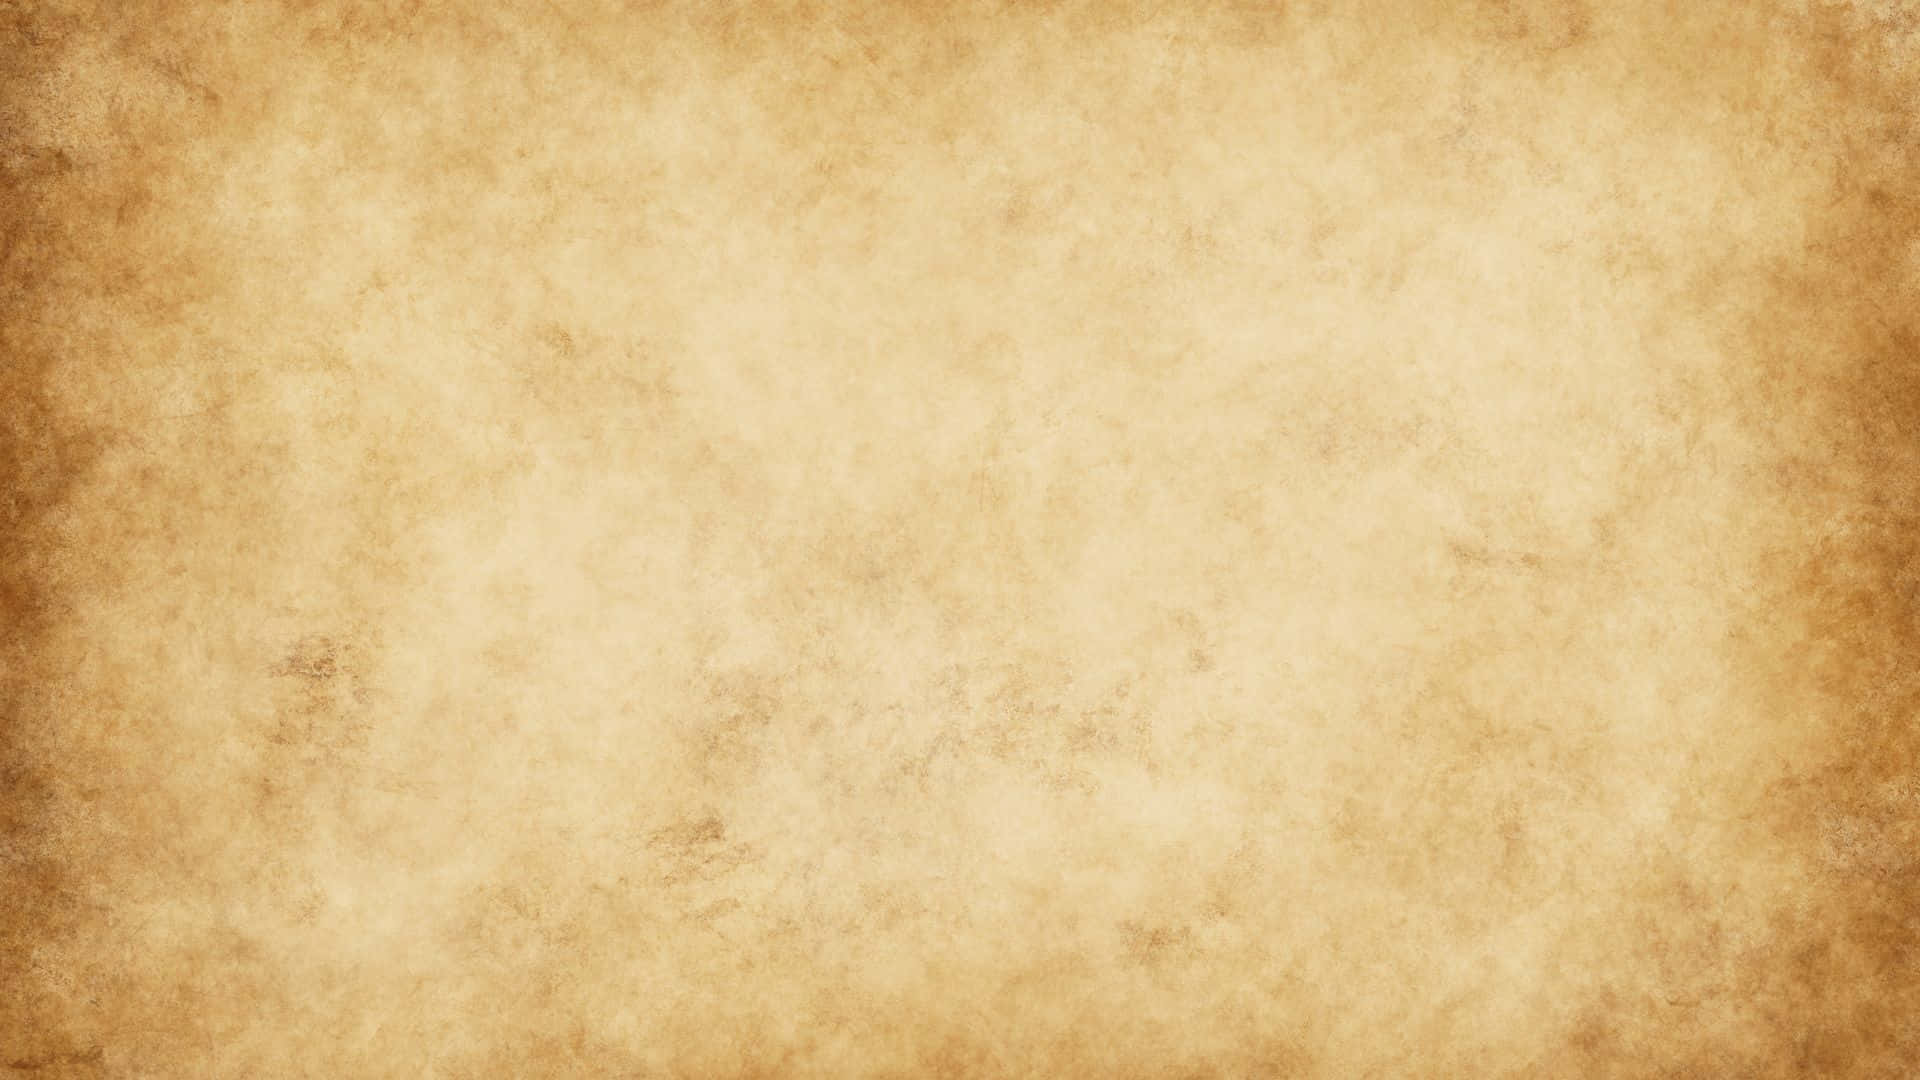 A Brown Paper Texture With A Rough Texture